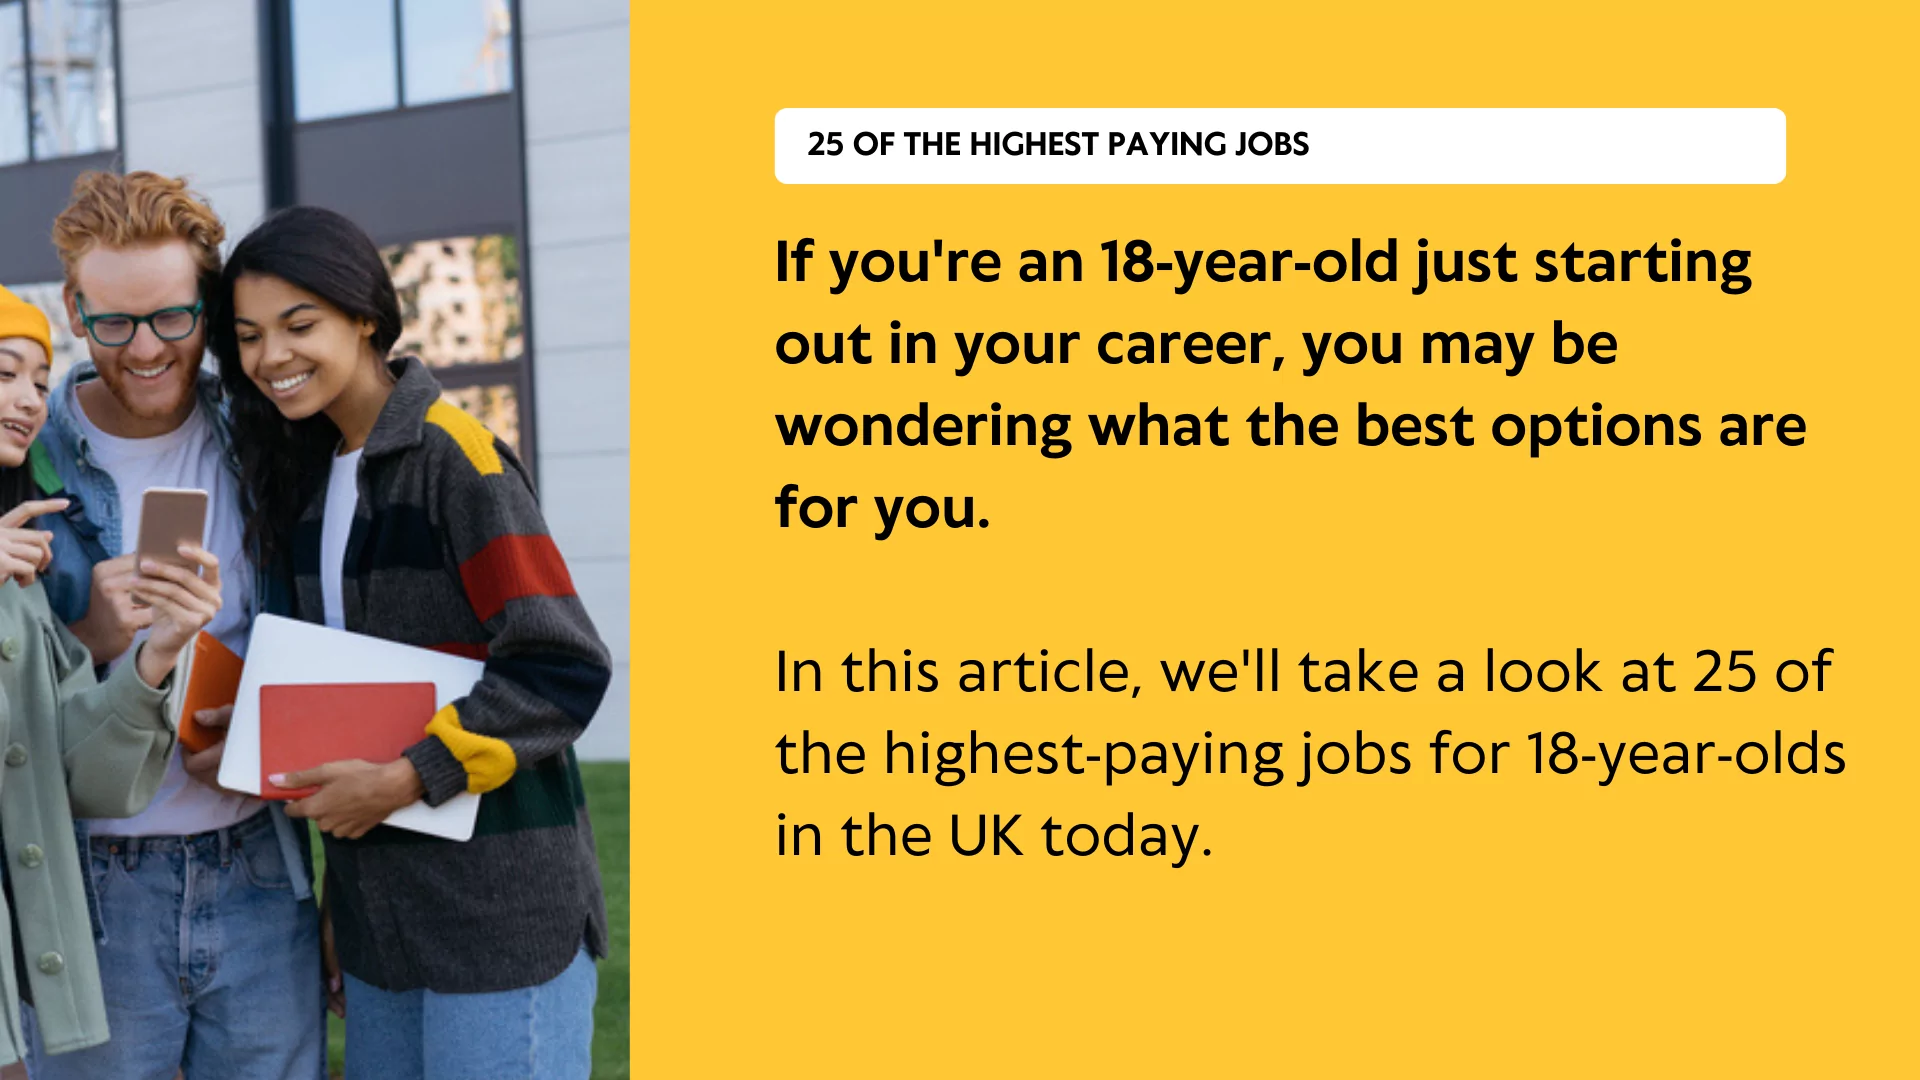 25 of the Highest Paying Jobs for an 18-Year-Old CMD Recruitment